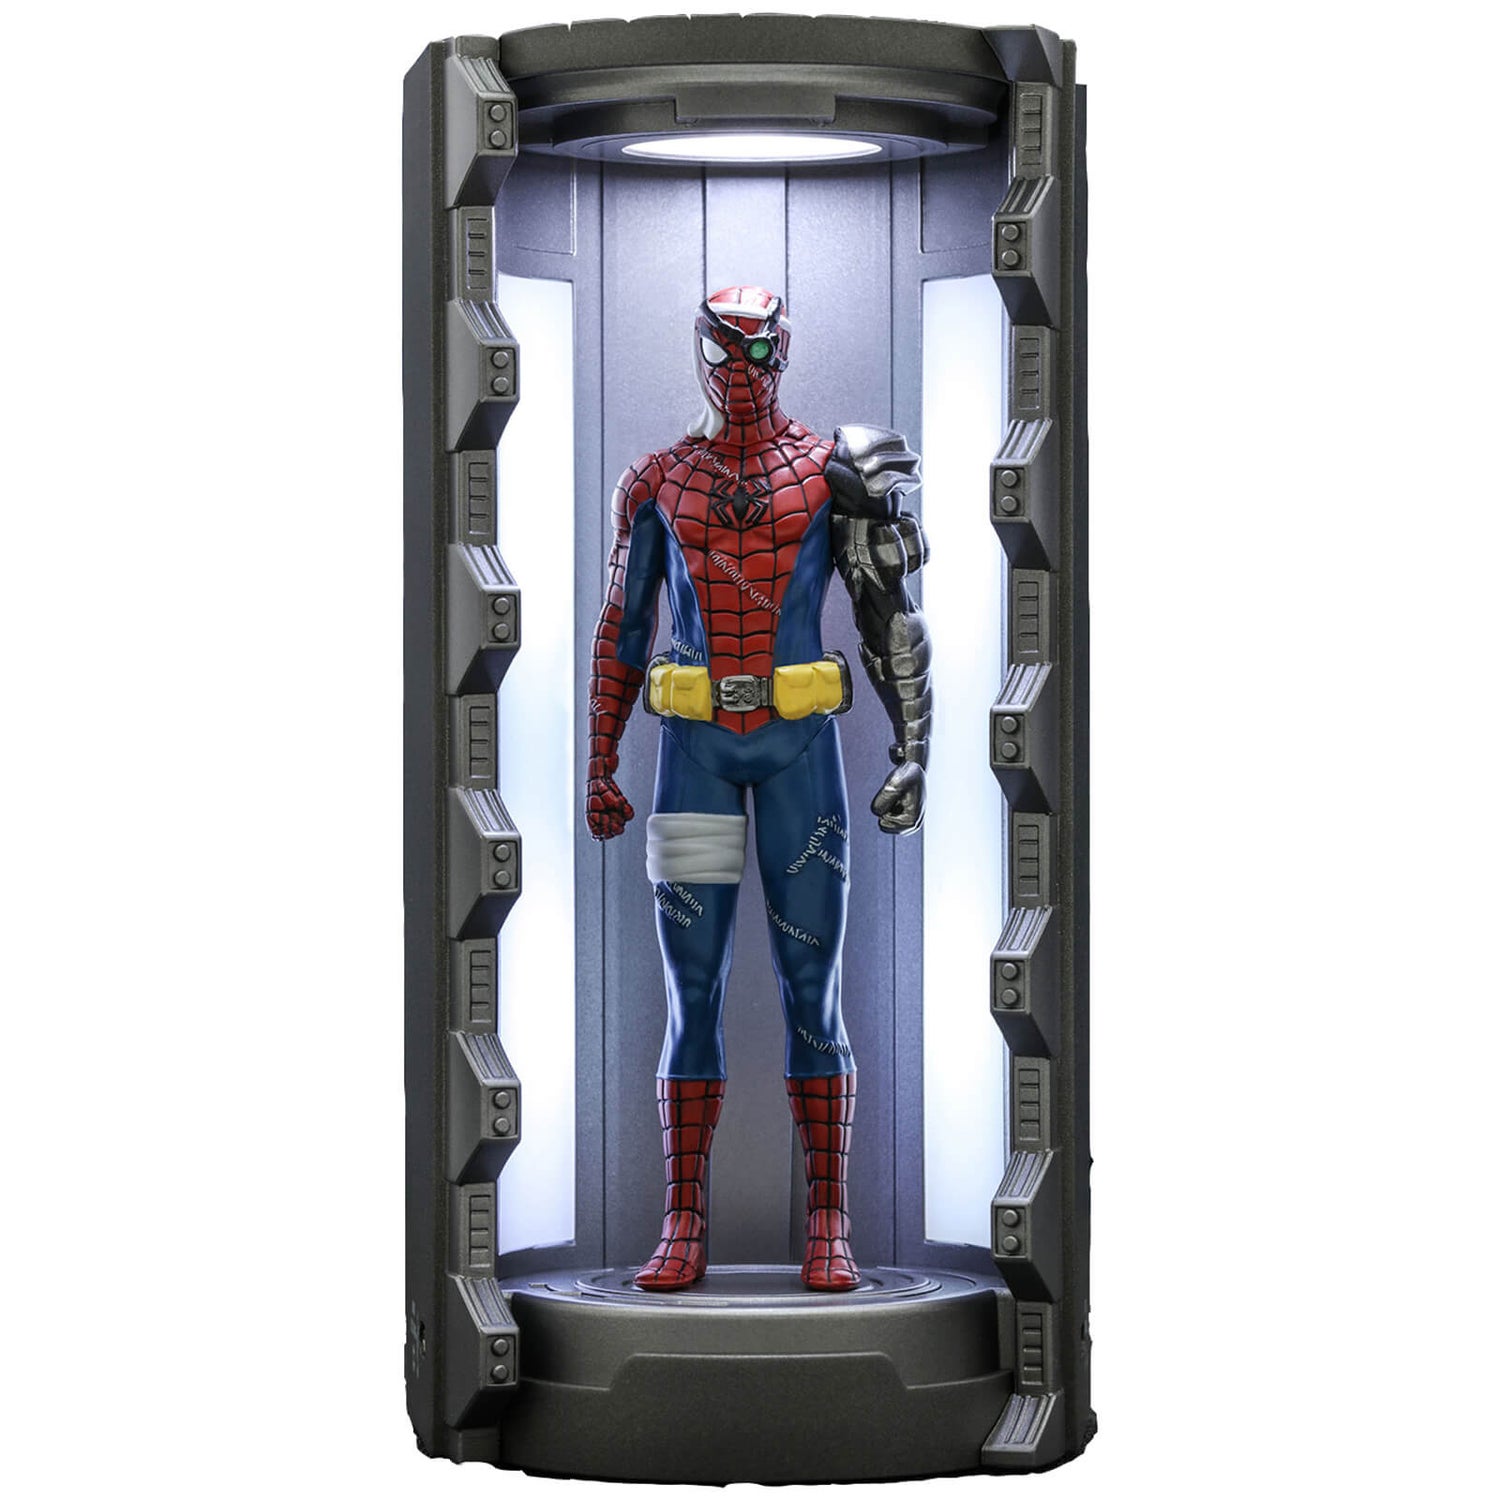 Hot Toys Marvel's Spider-Man Cyborg Suit with Spider-Man Armory Video Game Masterpiece Compact Miniature Figure